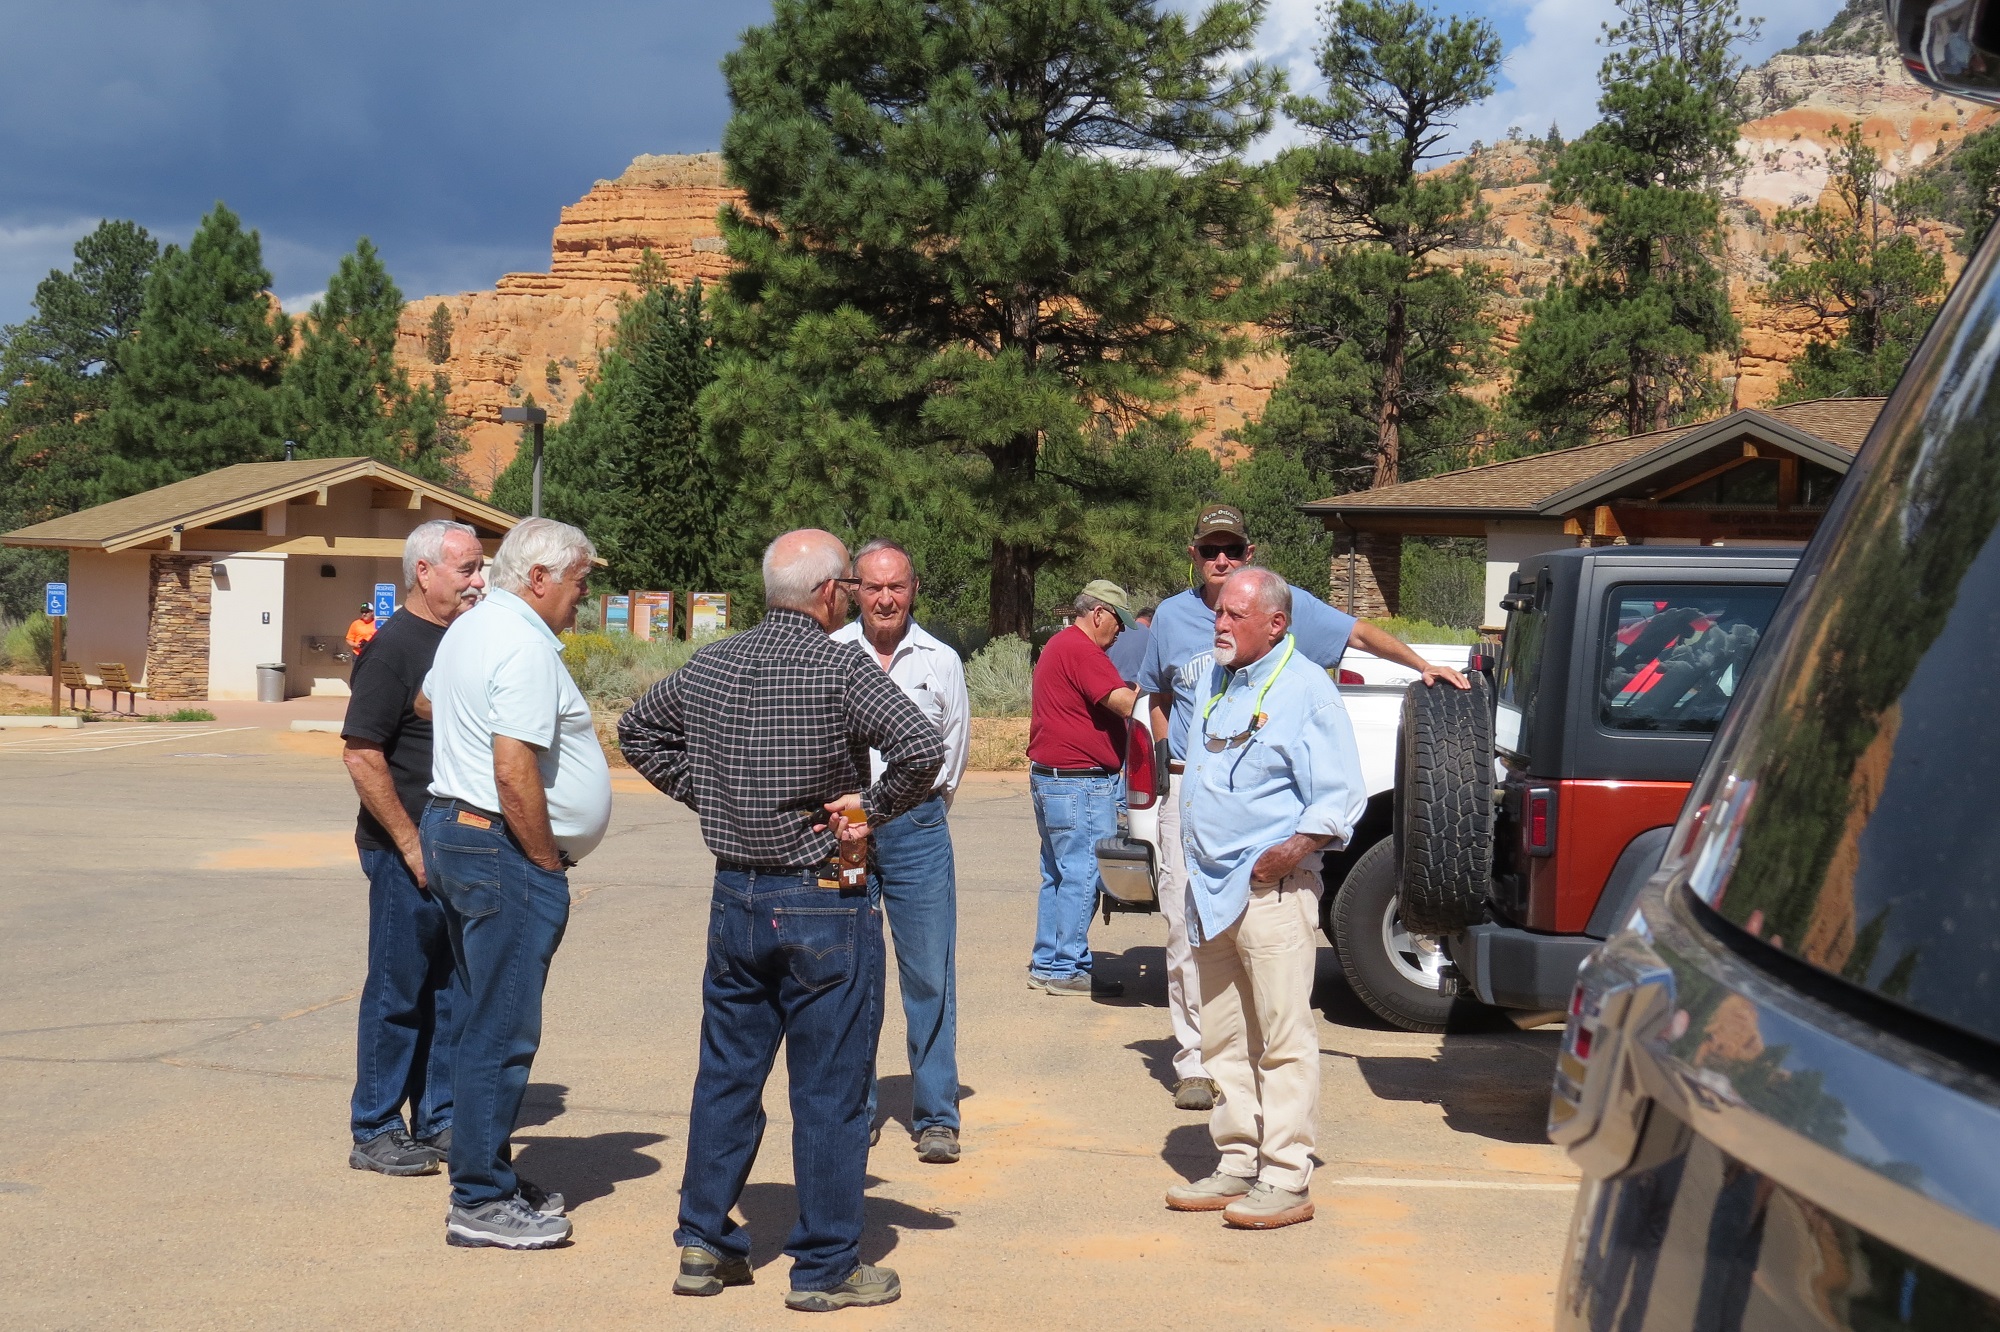 People gathered in the parking lot of the Red Canyon Visitor Center on UT Highway 12